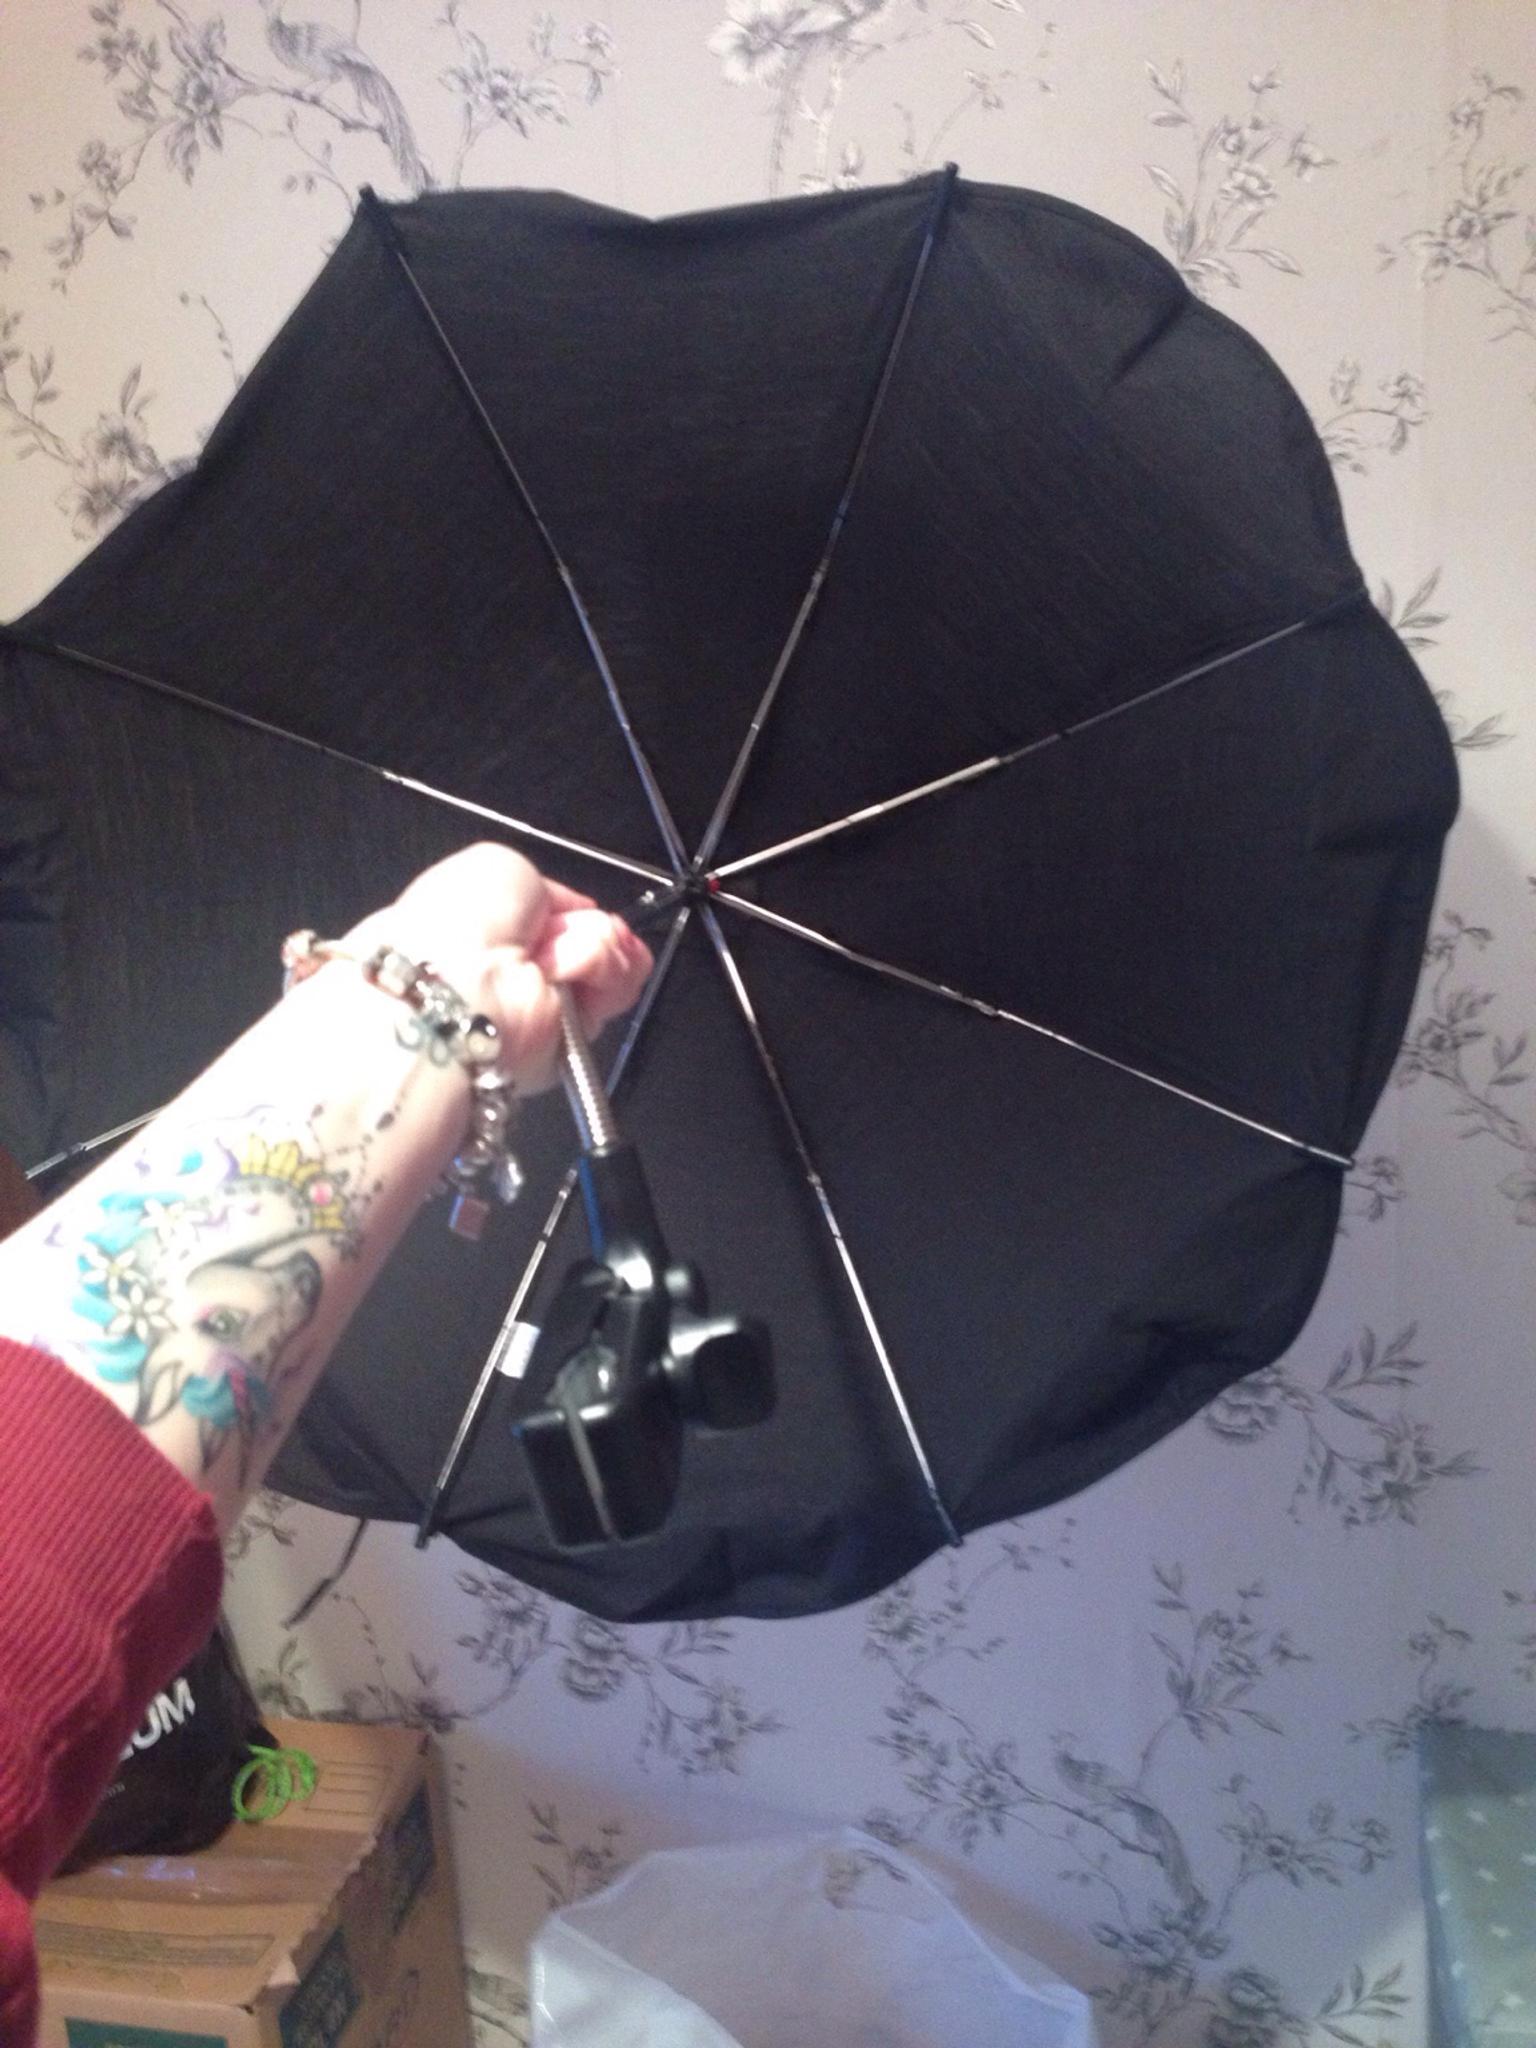 parasol for mothercare journey